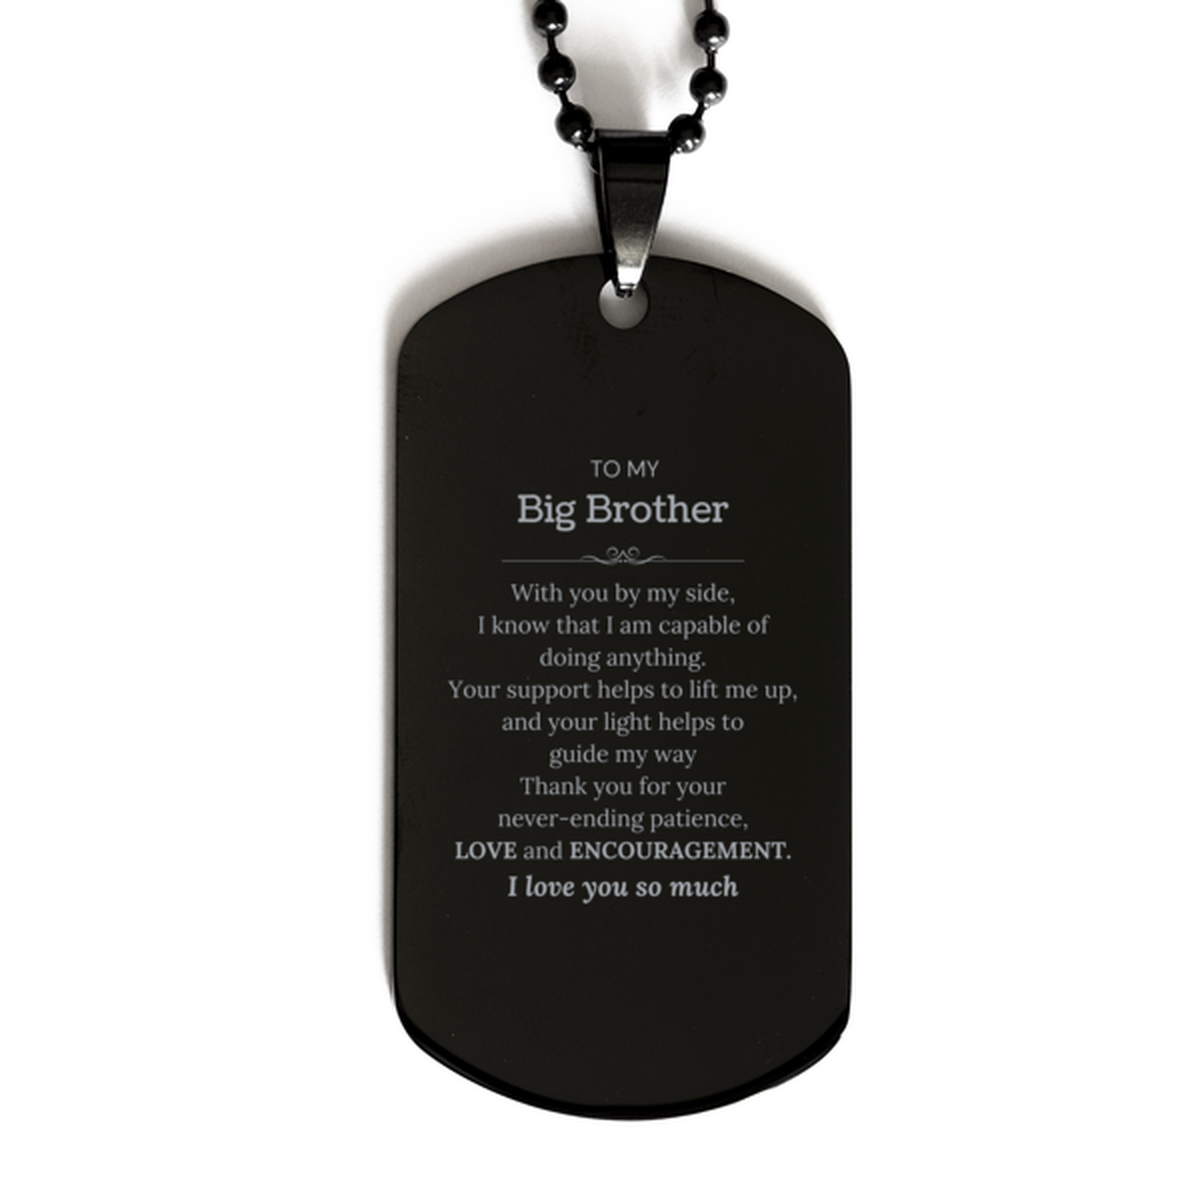 Appreciation Big Brother Black Dog Tag Gifts, To My Big Brother Birthday Christmas Wedding Keepsake Gifts for Big Brother With you by my side, I know that I am capable of doing anything. I love you so much